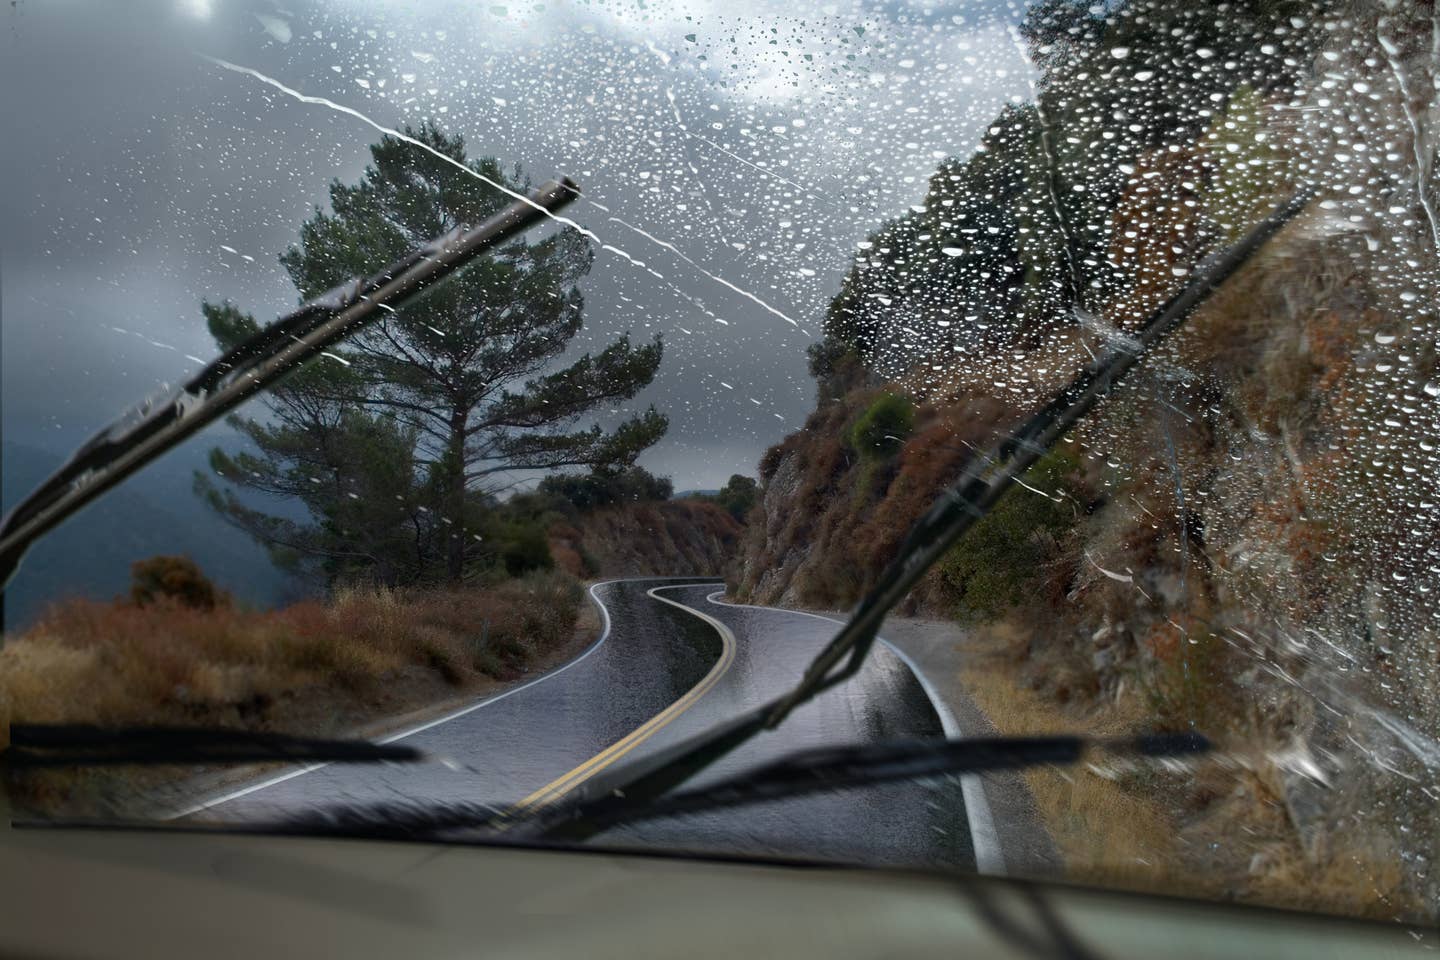 Windshield being cleaned by wiper blades during heavy rain and wind